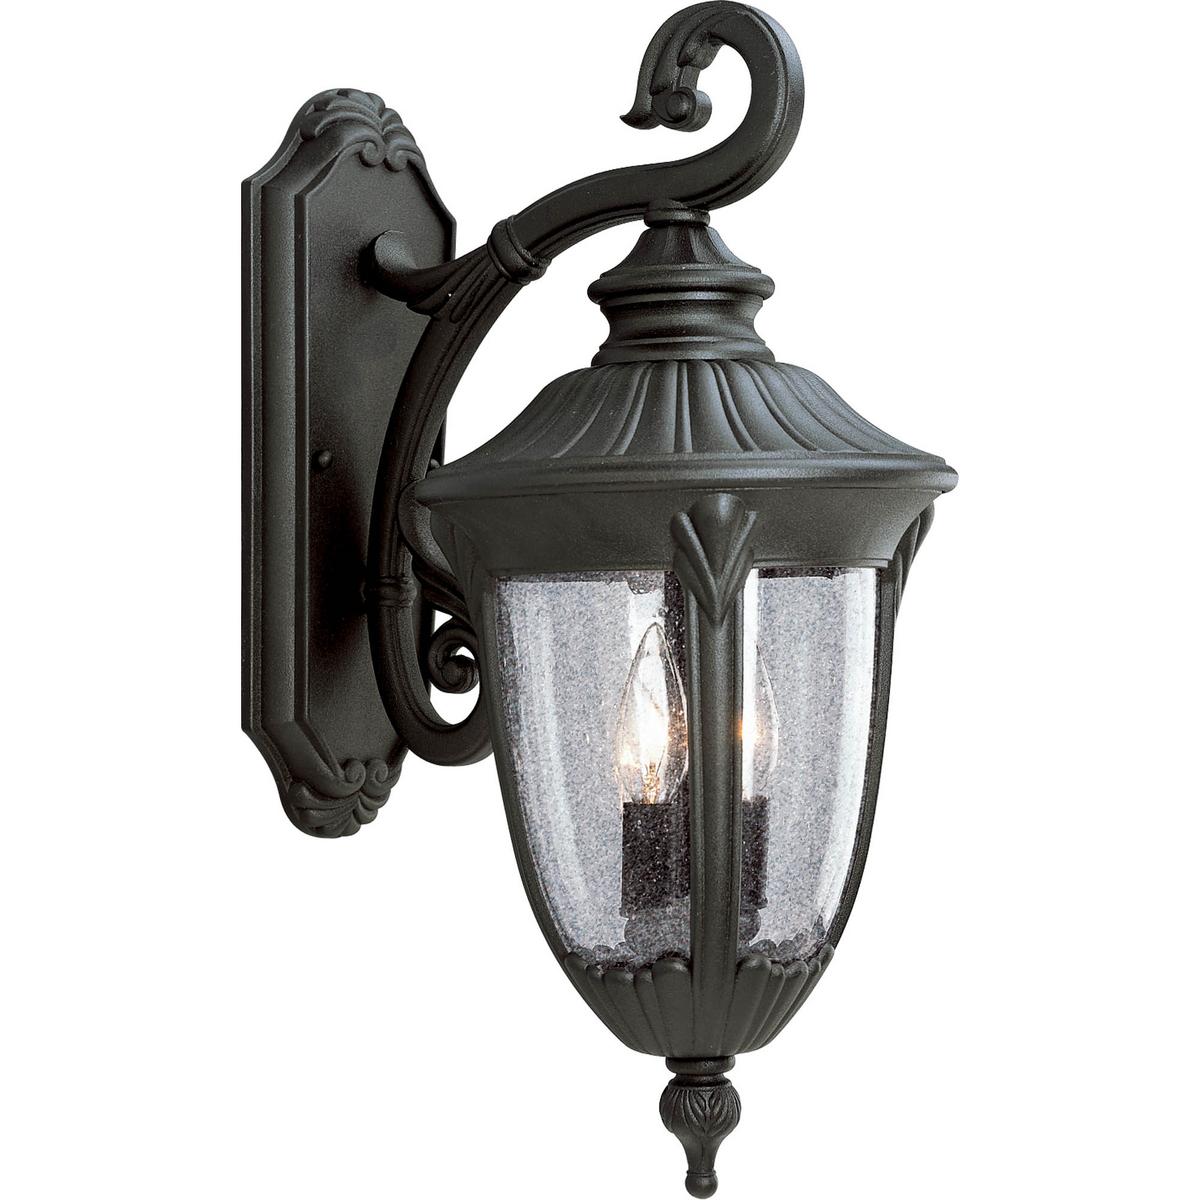 Hubbell P5822-31 The Meridian Collection features decorative shepherd hooks and acanthus cast arms. Clear, seed glass urns finishes off the distinctive and stately feeling of old world elegance. The two-light cast aluminum medium wall lantern has a durable Textured Black 